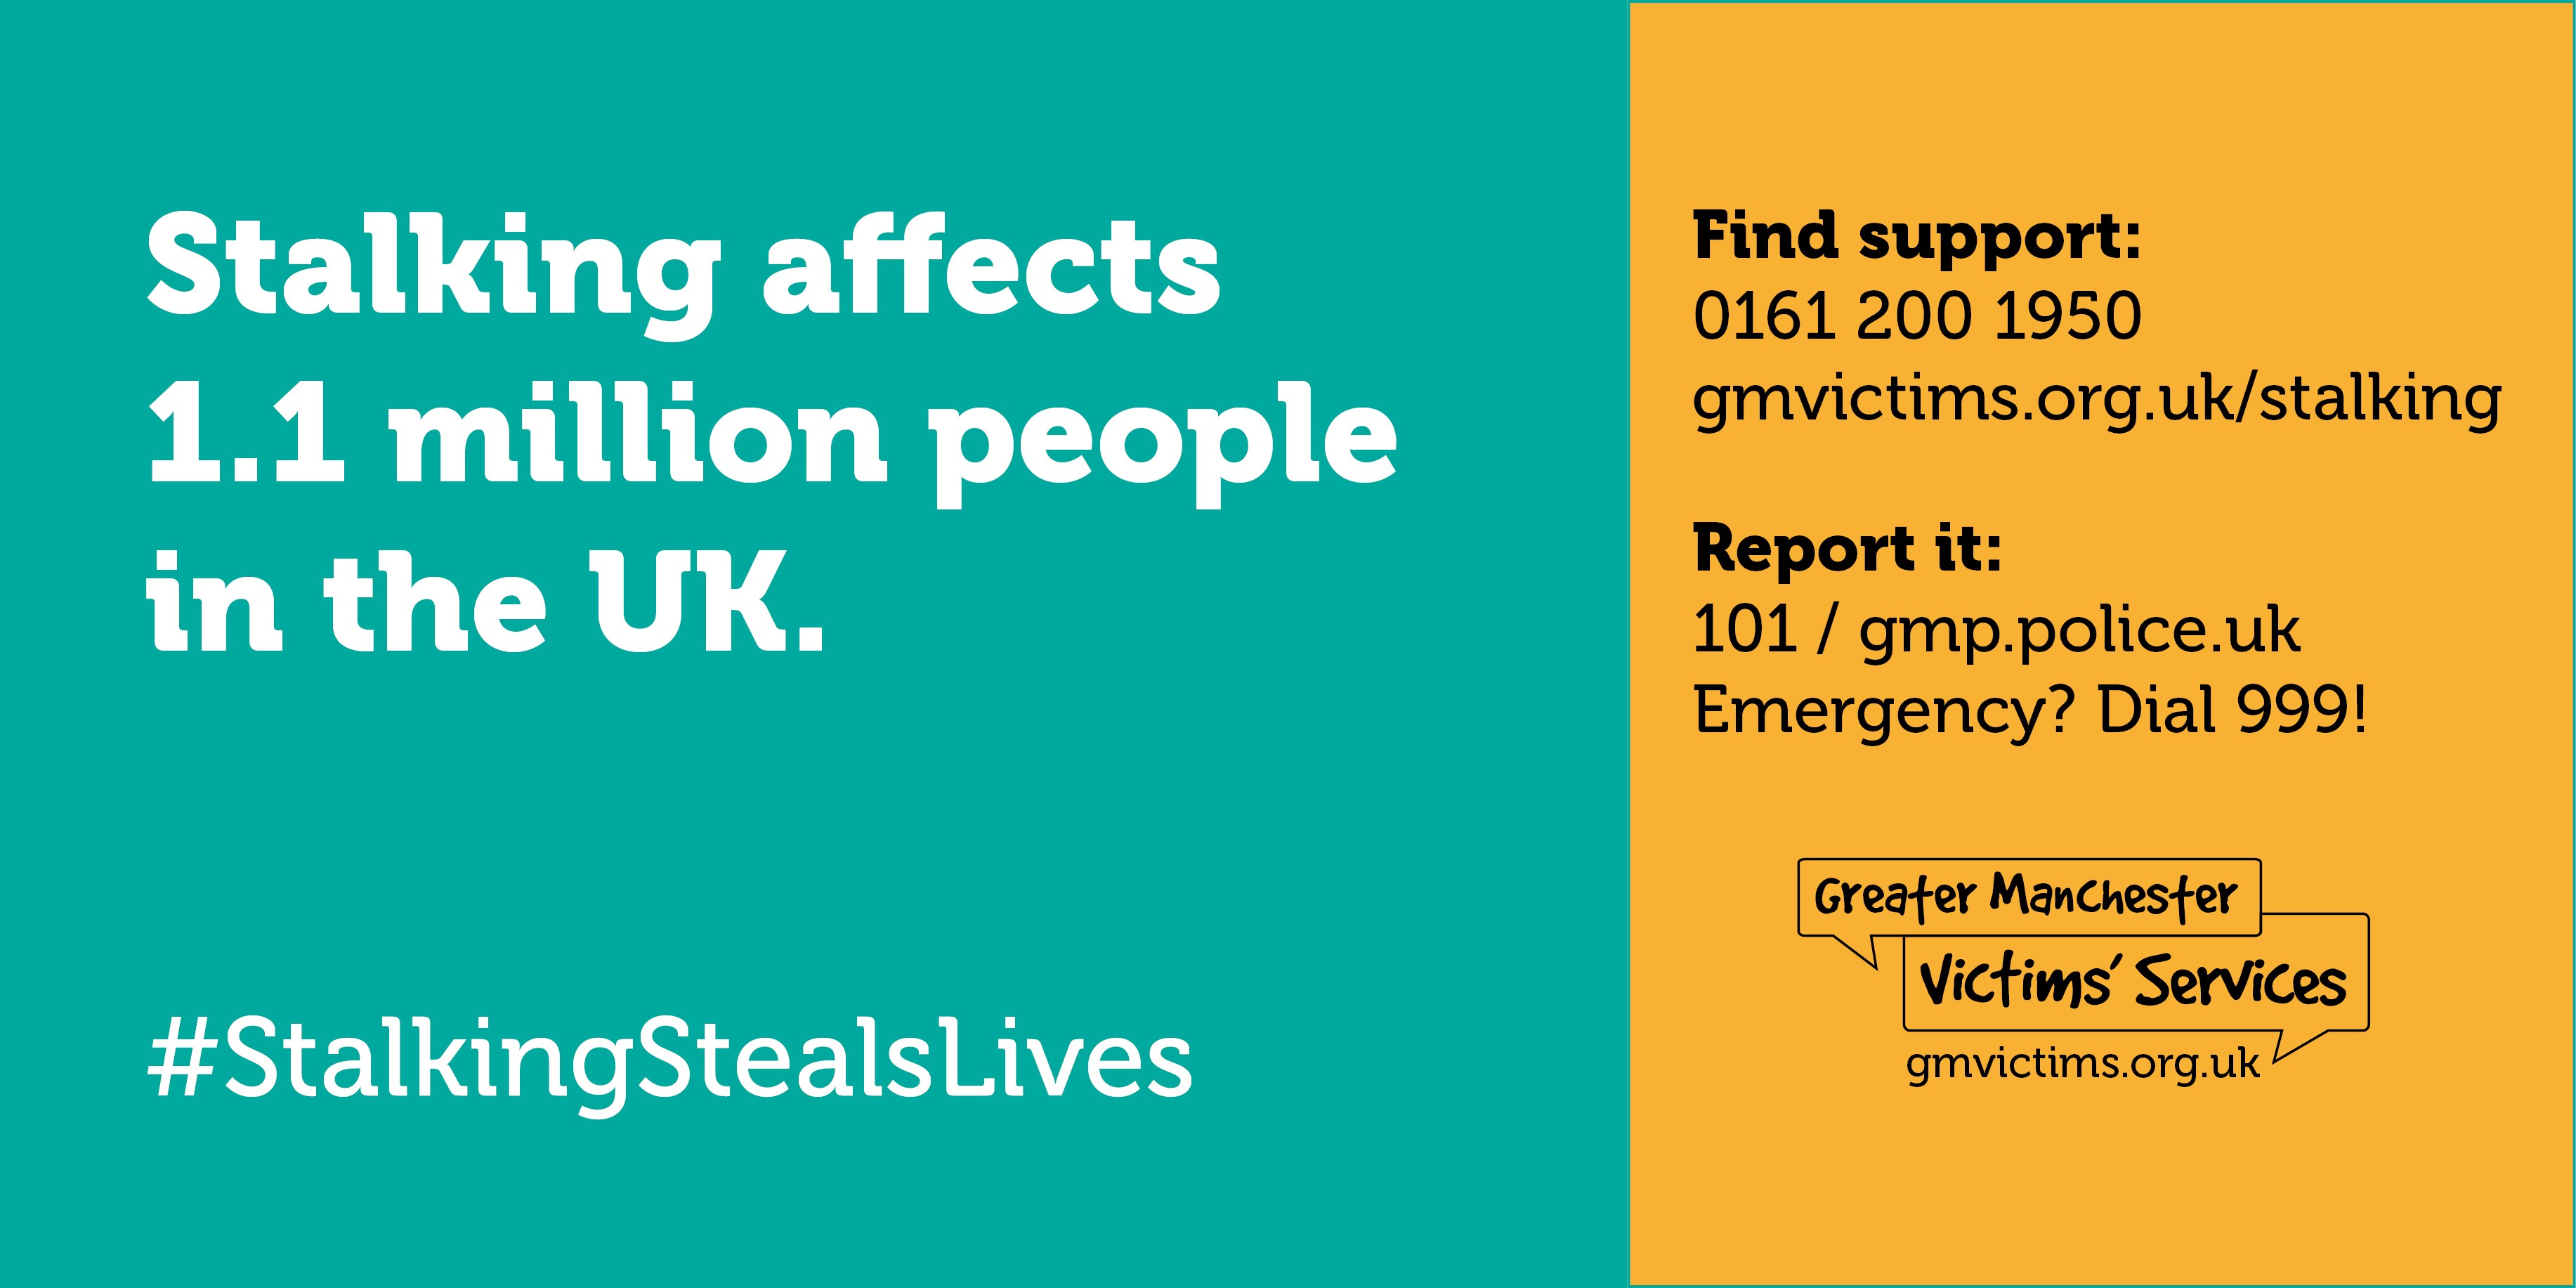 Stalking affects 1.1 million people in the UK